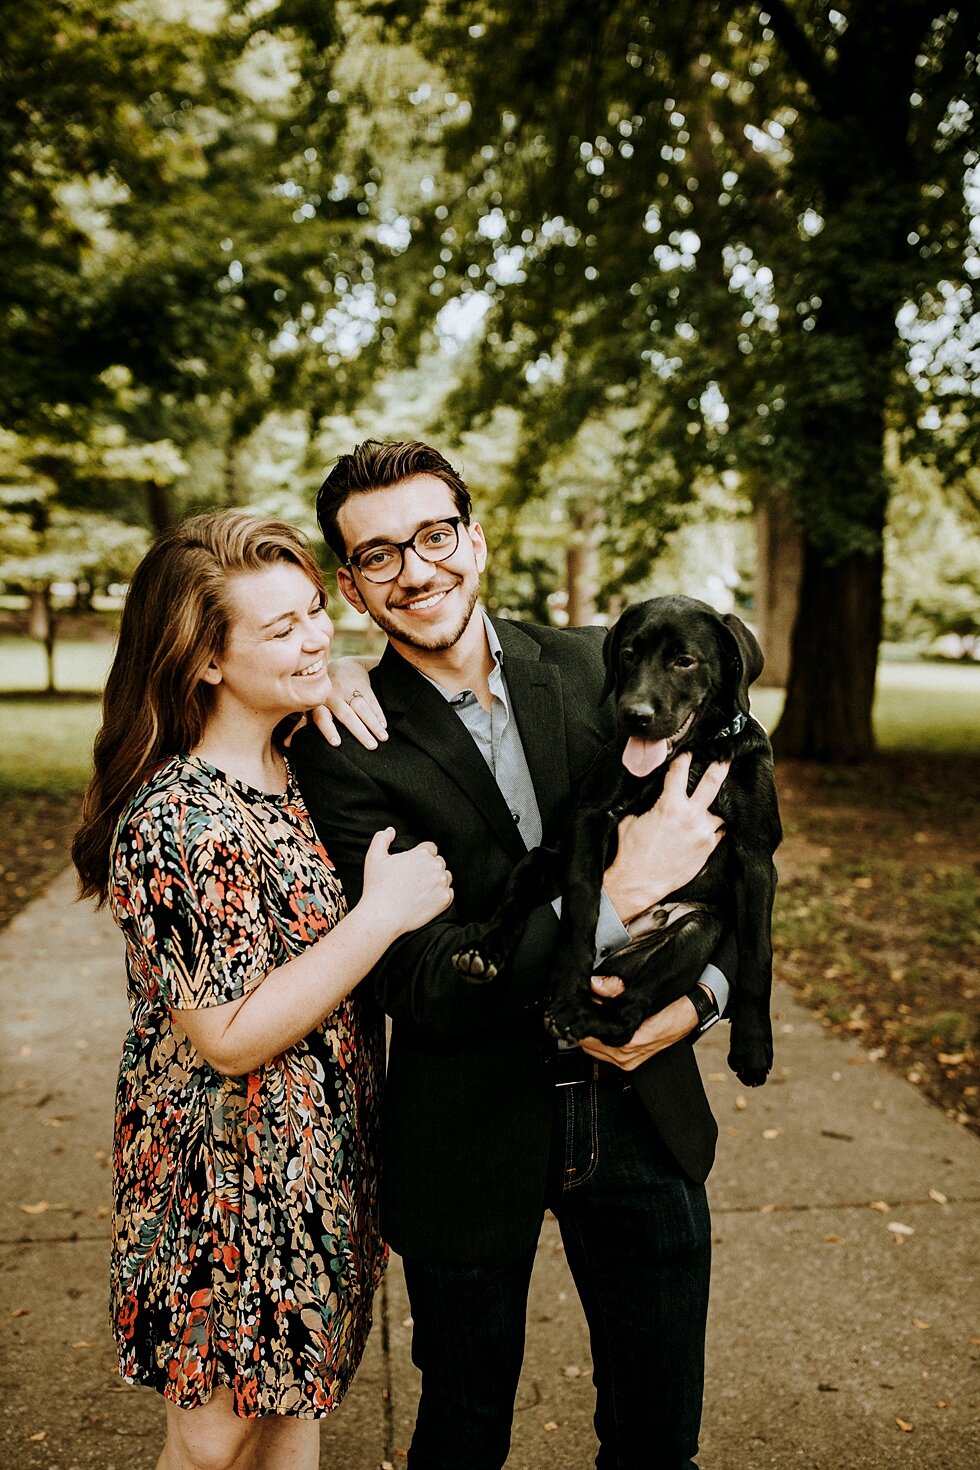  Engaged couple with their furry family member during their engagement session in Louisville, Kentucky. getting married outdoor session engaged couple together wedding preparation love excited stunning relationship #engagementphotos #midwestphotograp